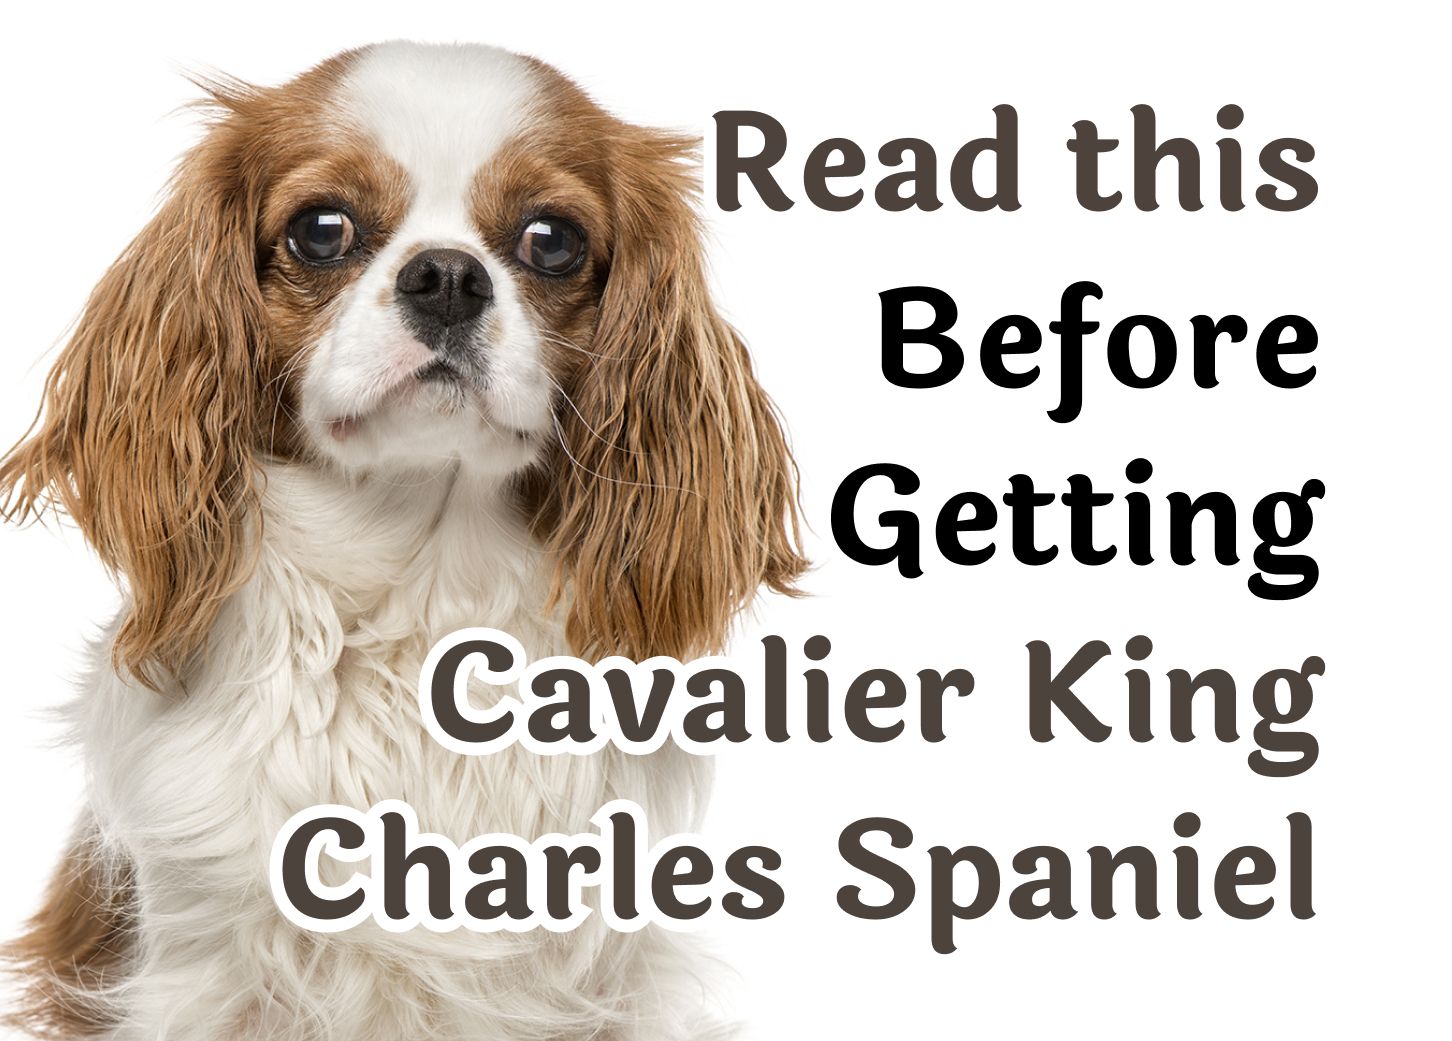 24 Questions То Consider Before Getting A Cavalier King Charles Spaniel